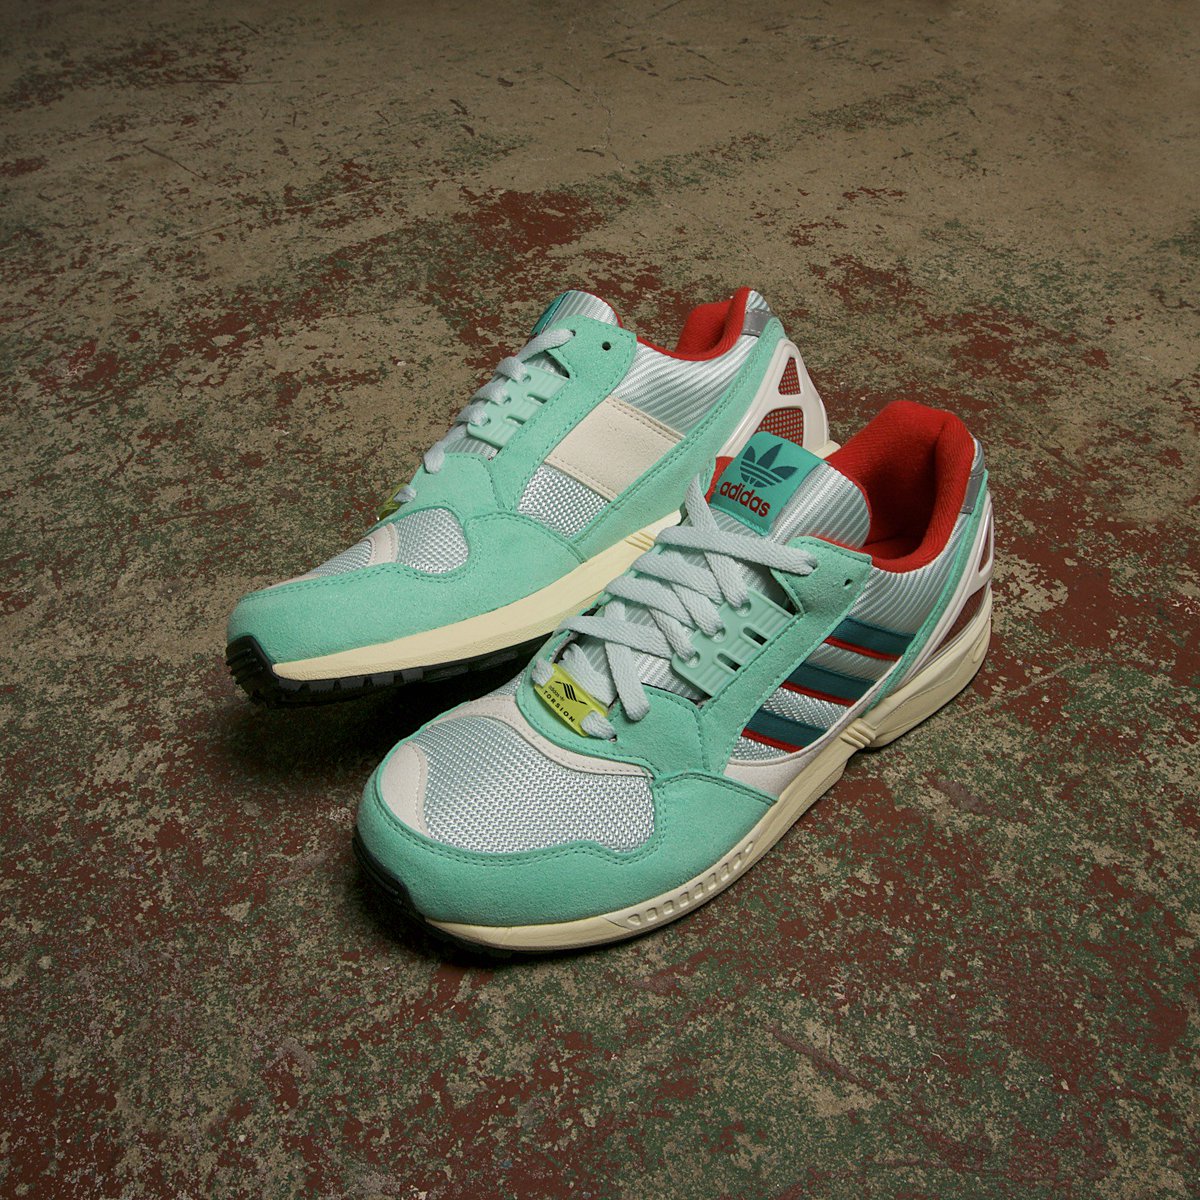 Adidas '30 Years of Torsion' OG ZX 9000 